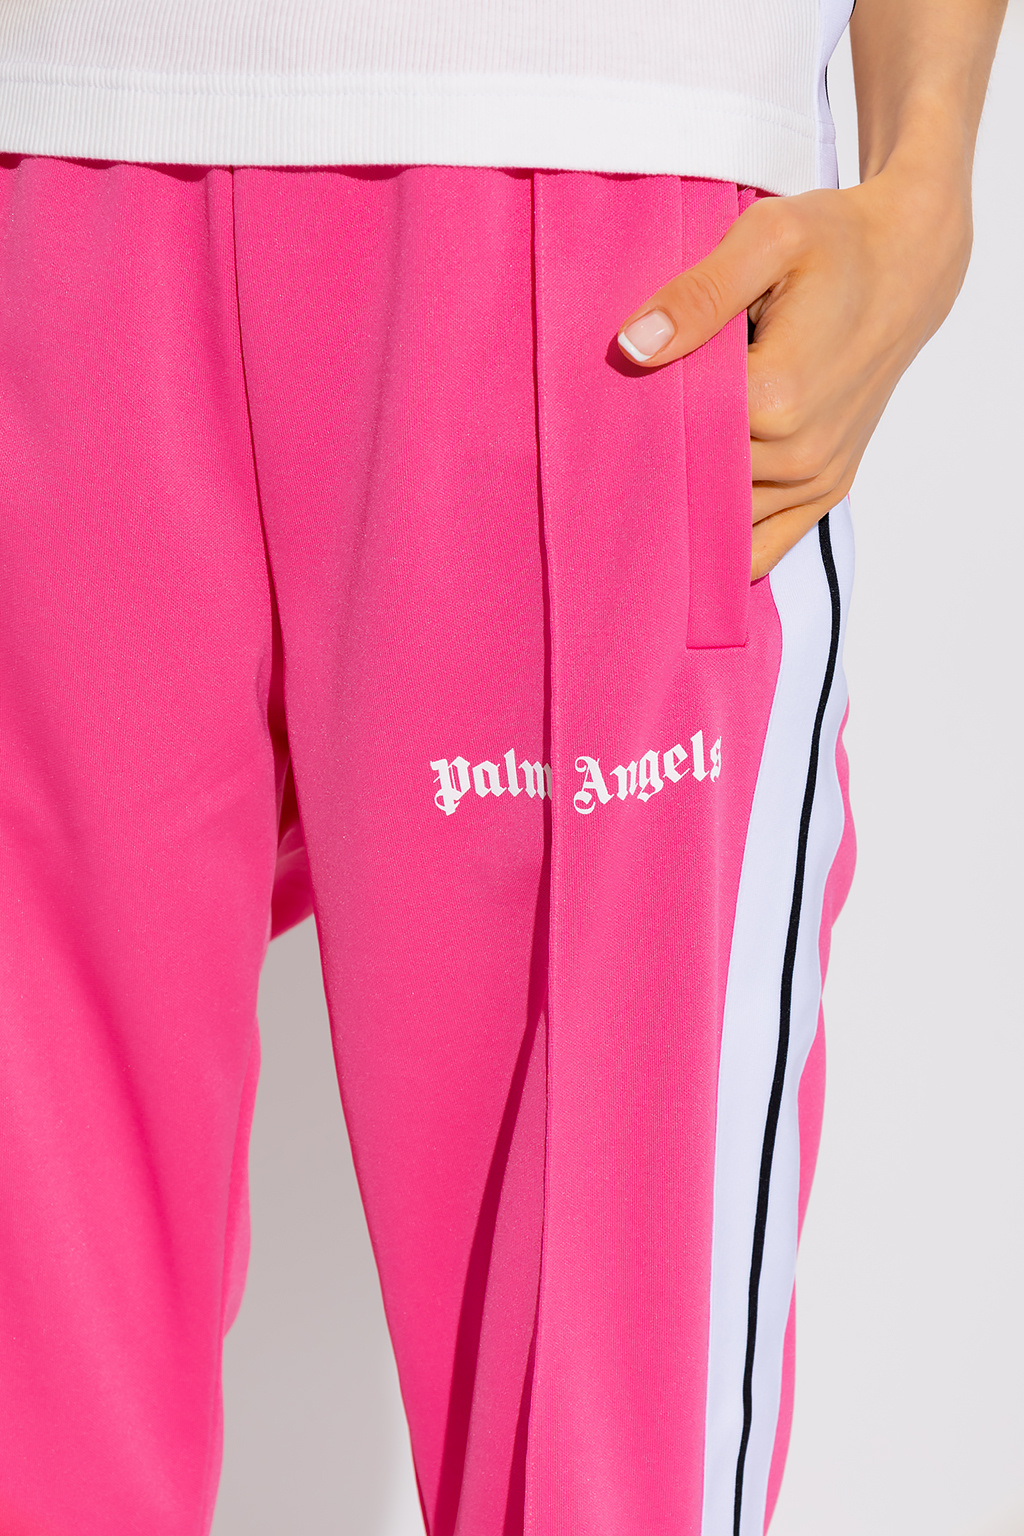 Palm Angels The hottest trend